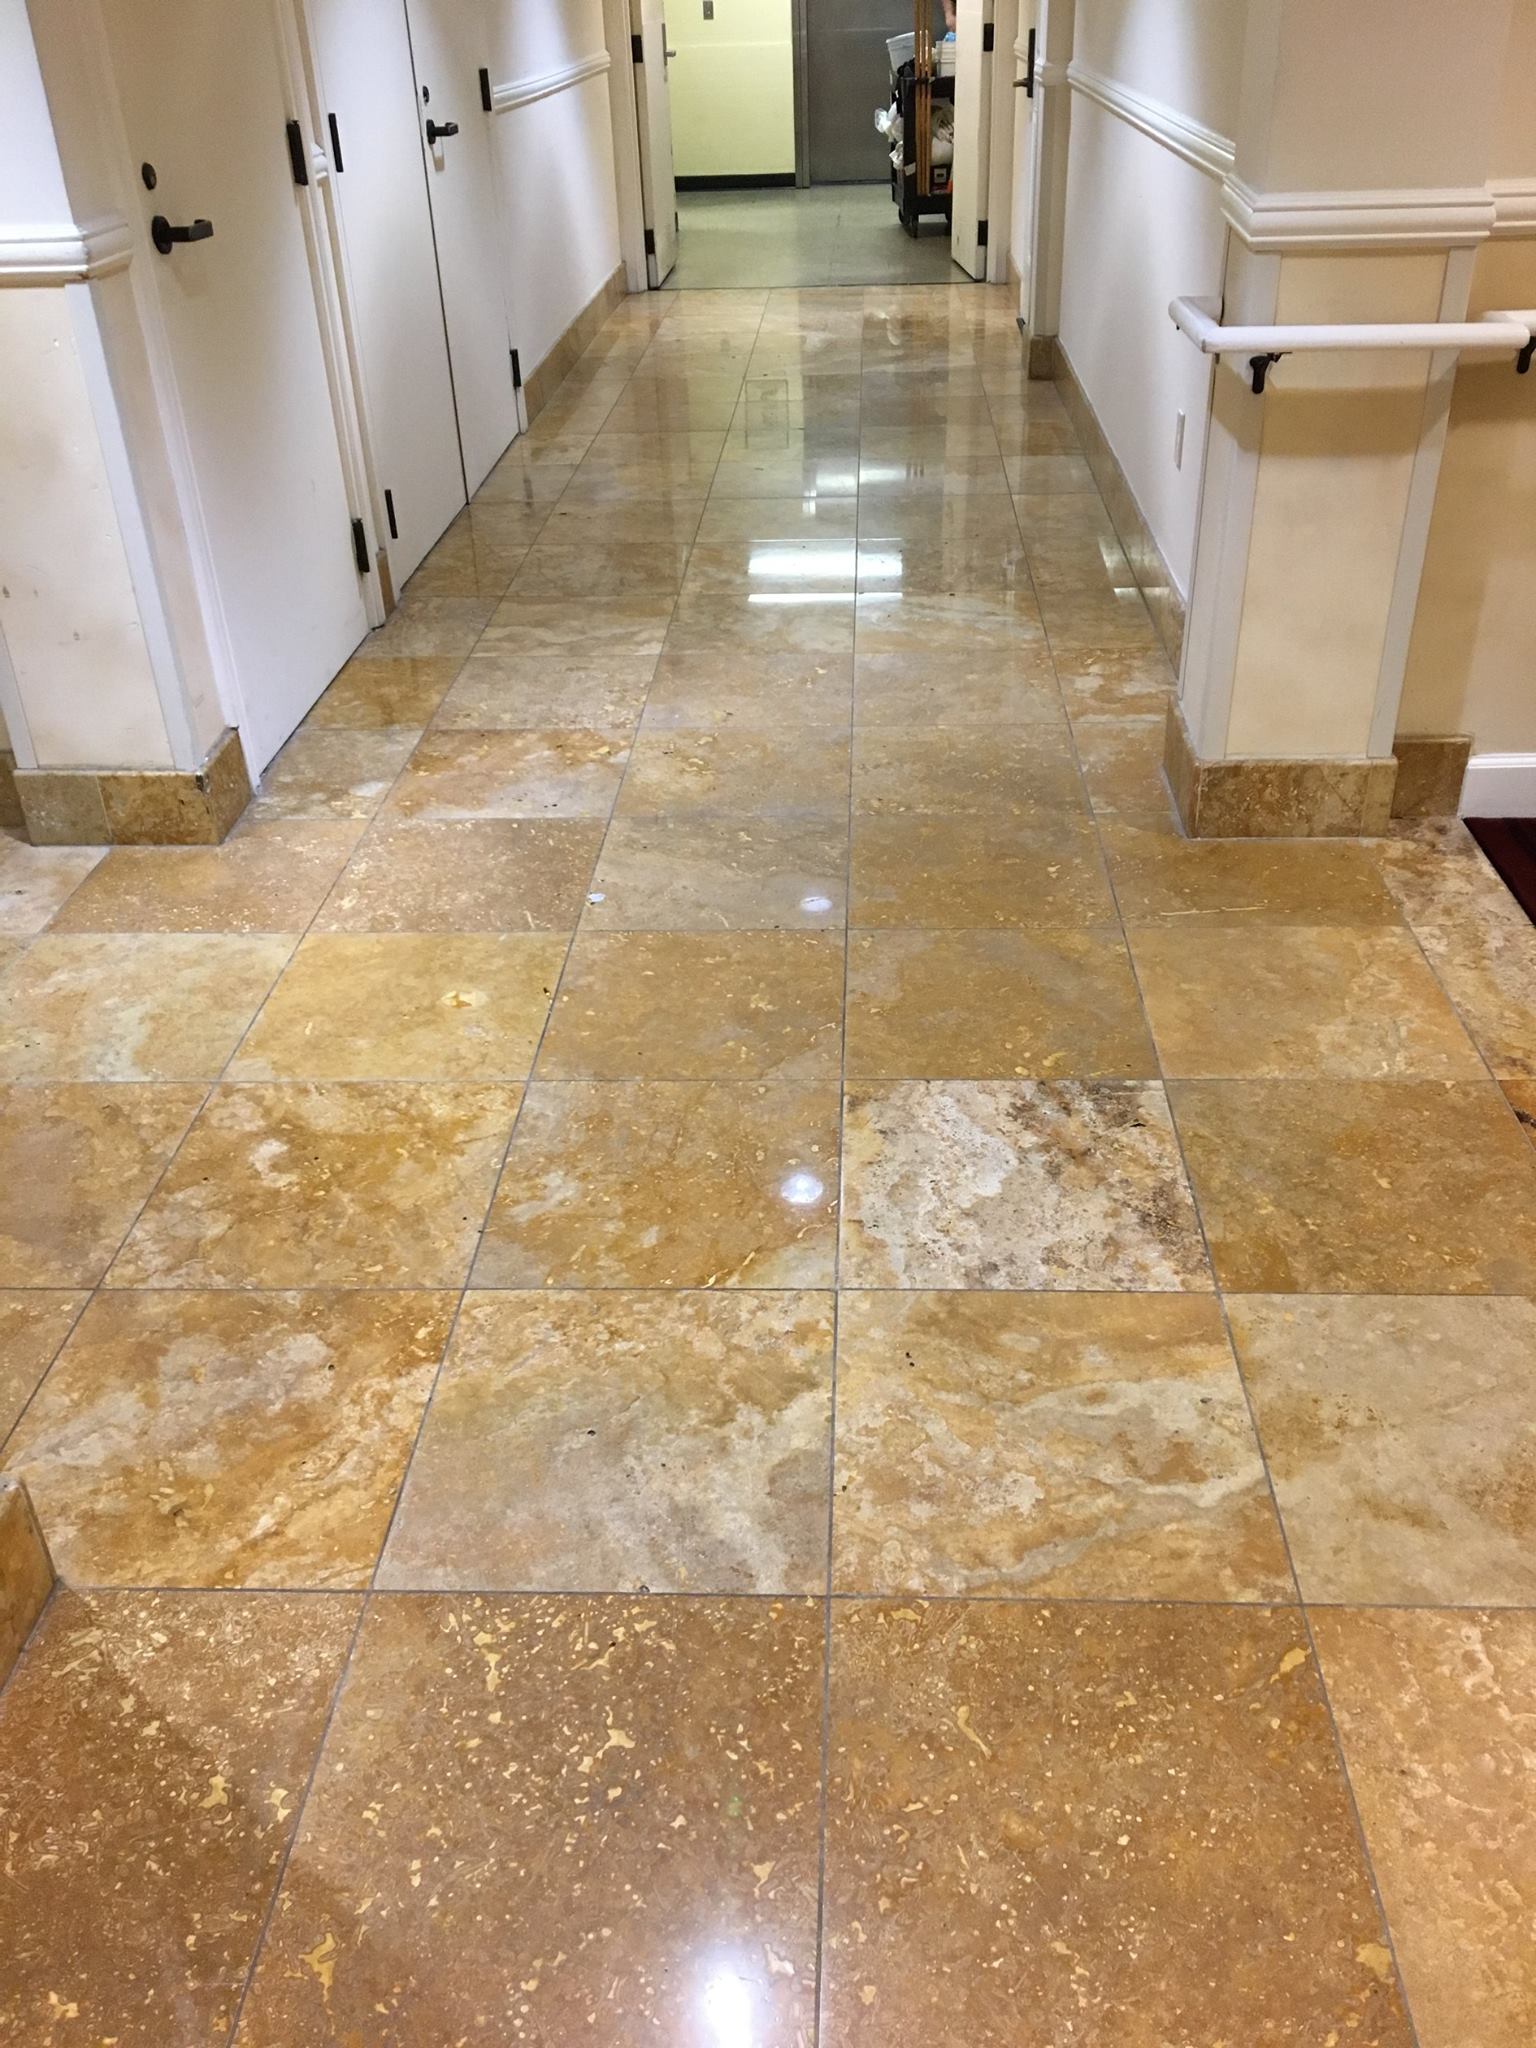 Finished Floors offers floor coating, urethane removal, polishing, tile and grout, and healthcare and high traffic floor services in Orangevale, California